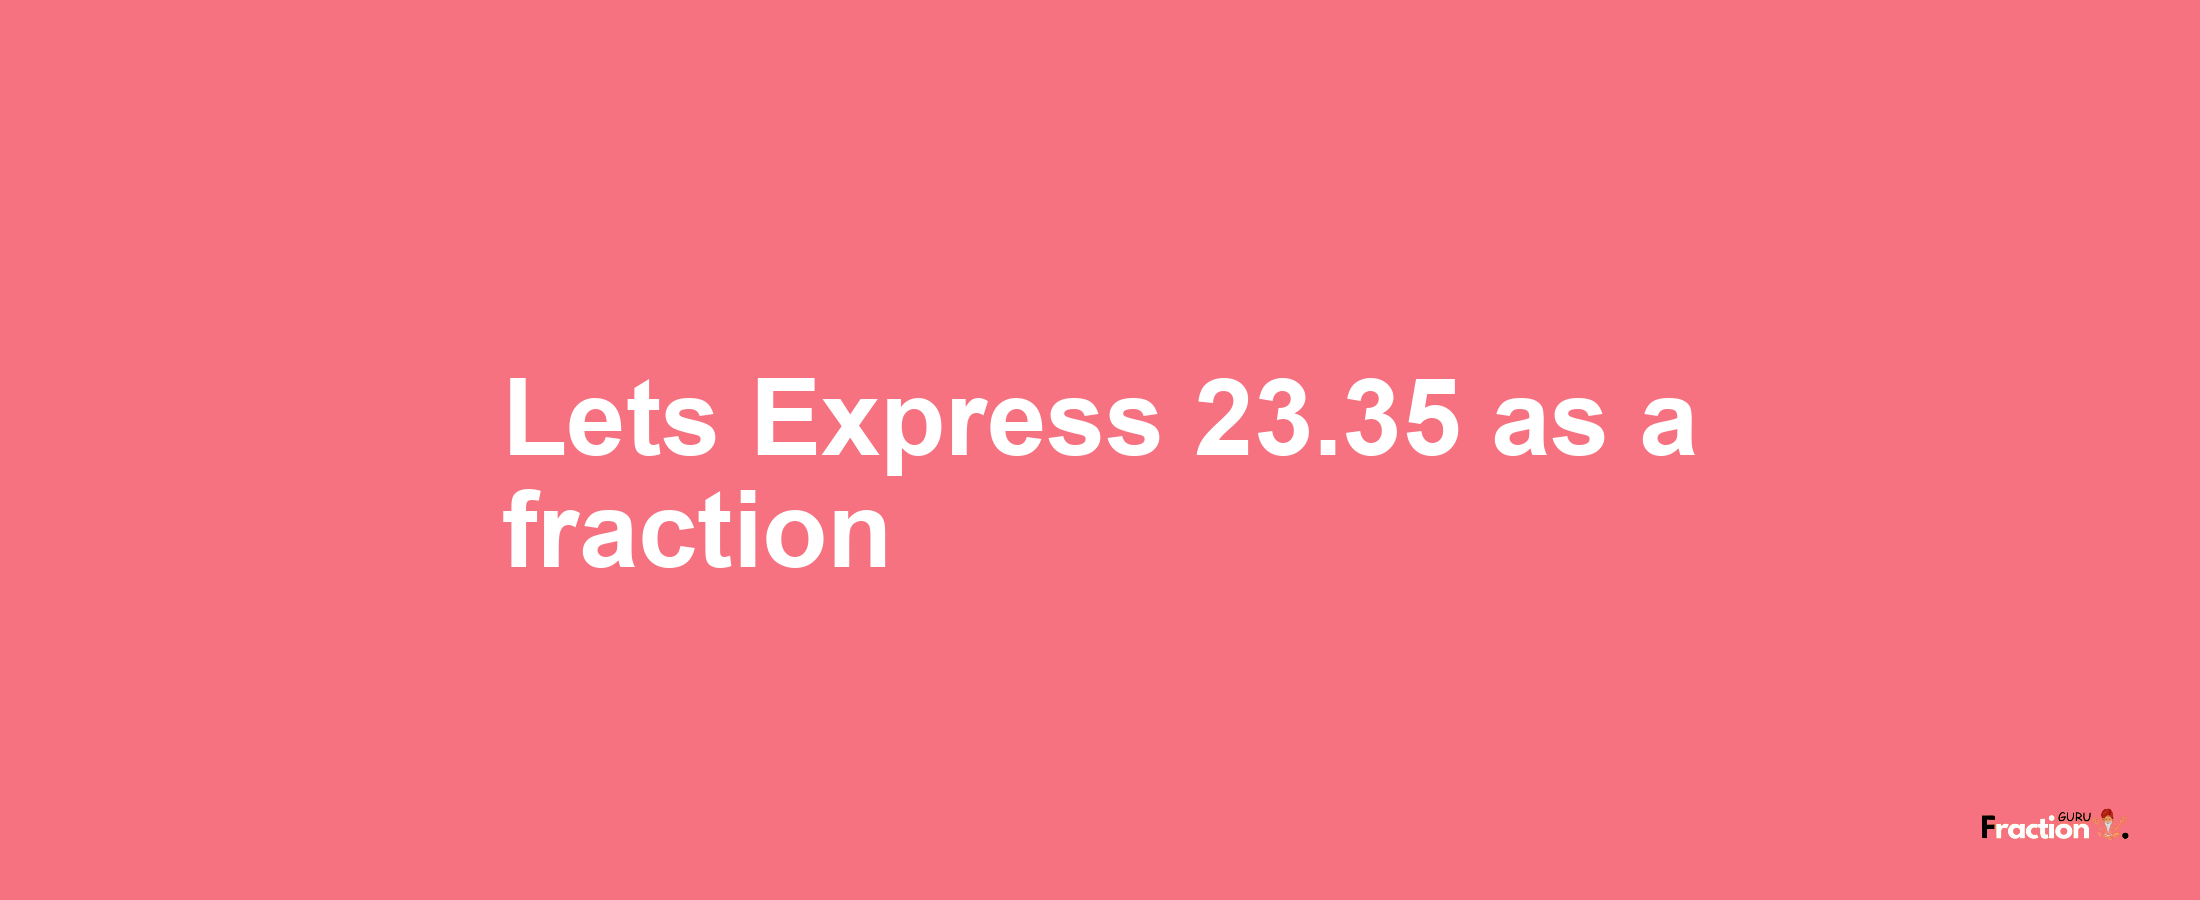 Lets Express 23.35 as afraction